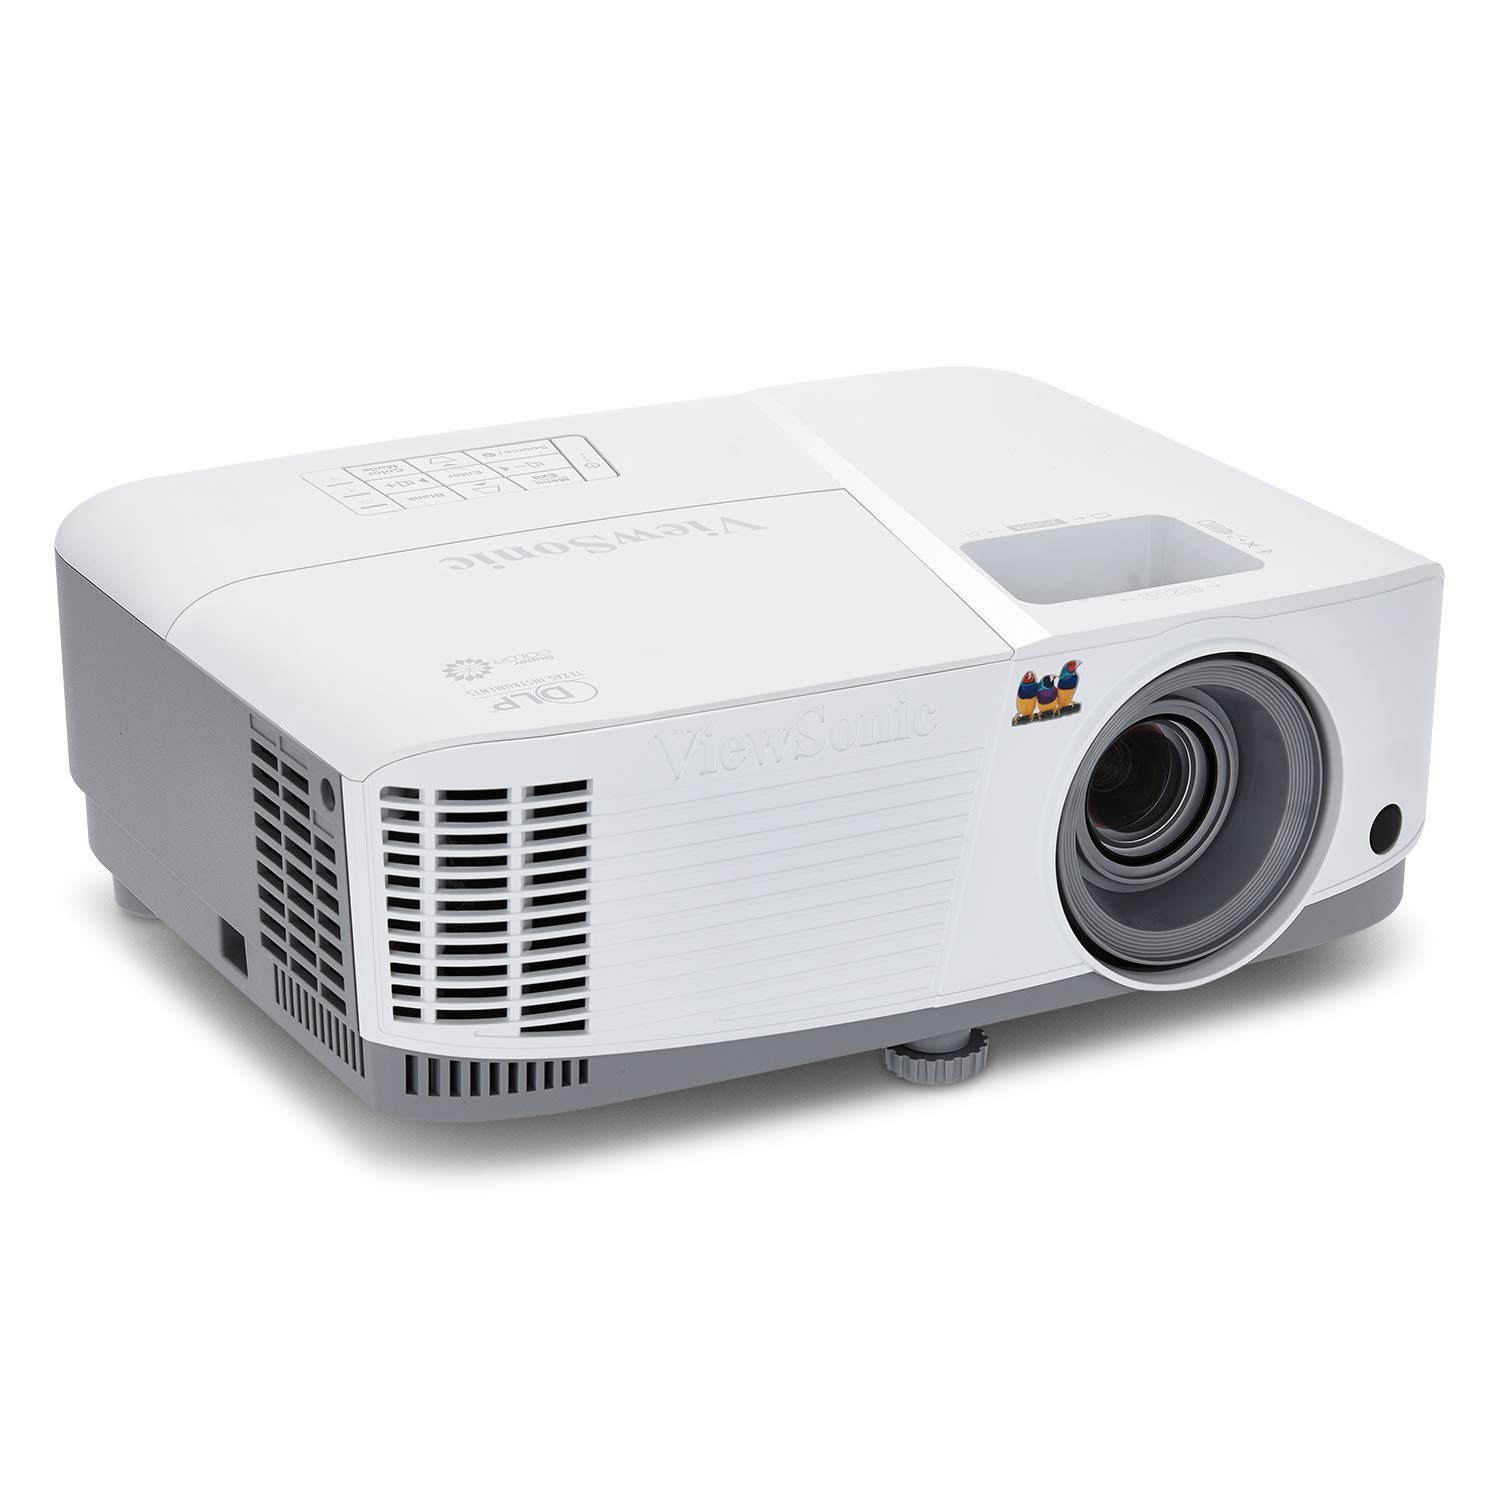 ViewSonic PA503S 3800 Lumens SVGA High Brightness Projector for Home and Office with HDMI Vertical Keystone